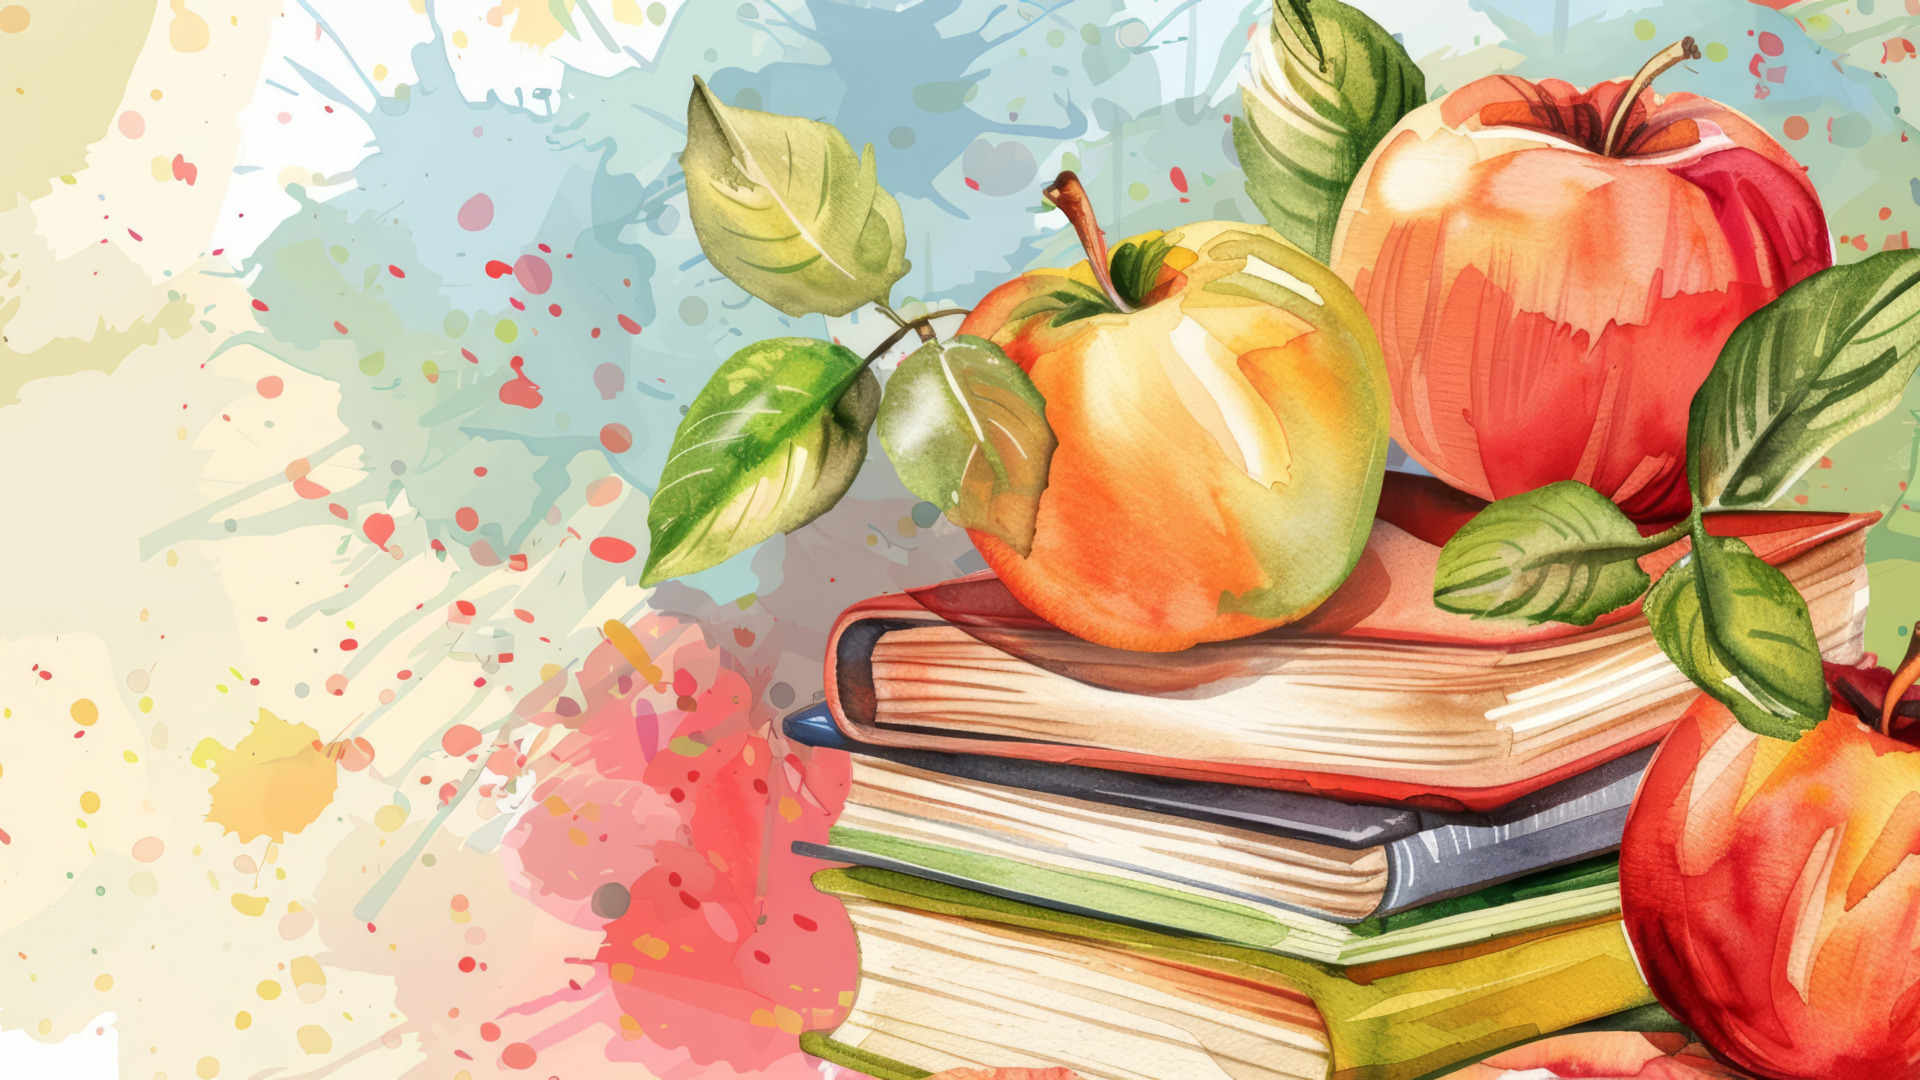 Watercolor painting of apples on a stack of books